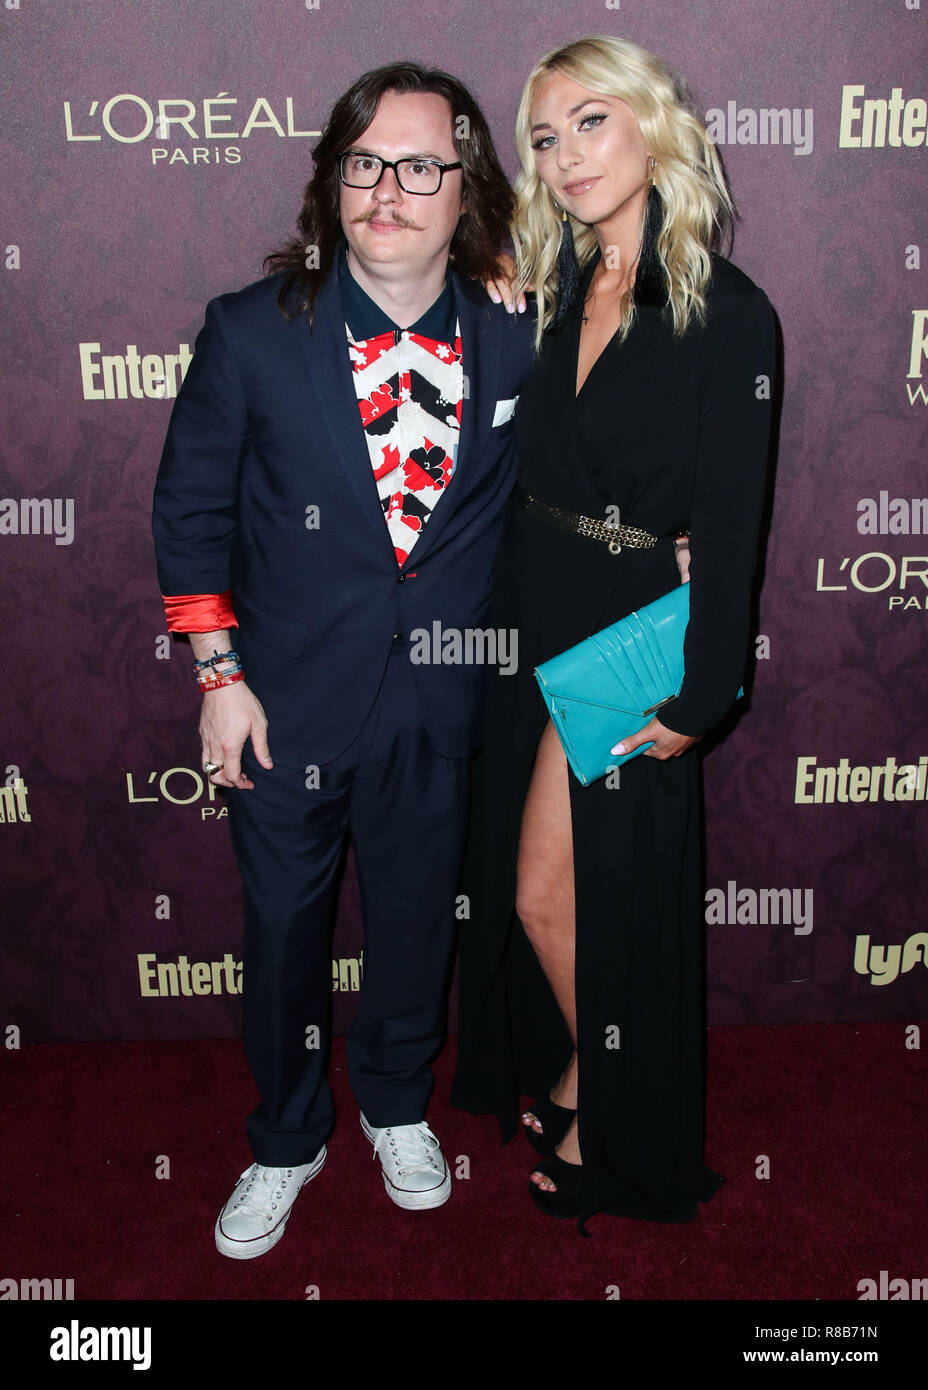 WEST HOLLYWOOD, LOS ANGELES, CA, USA - SEPTEMBER 15: Clark Duke, Cody  Kennedy at the 2018 Entertainment Weekly Pre-Emmy Party held at the Sunset  Tower Hotel on September 15, 2018 in West